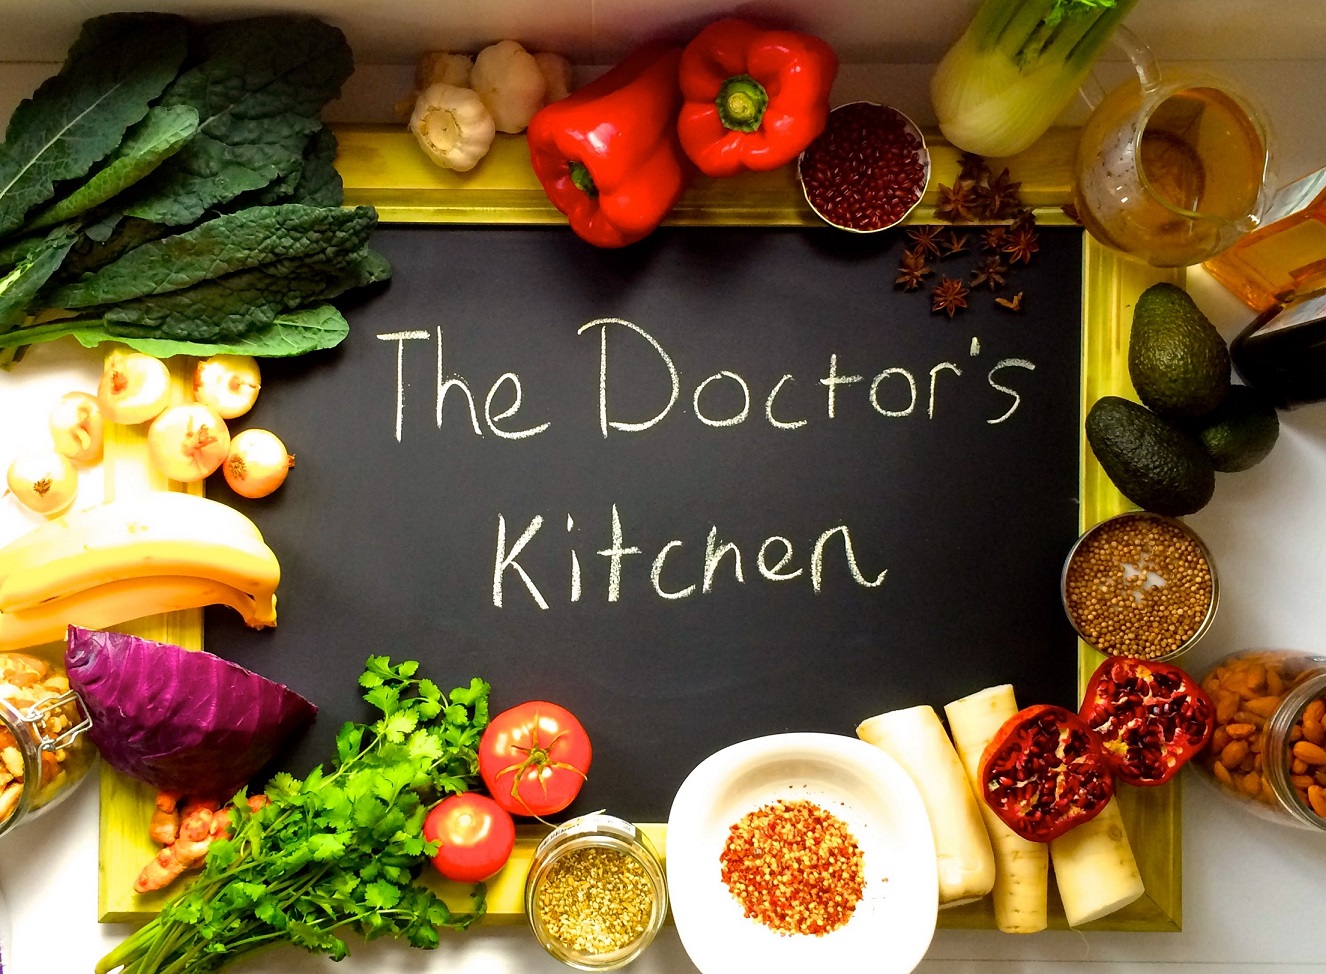 Fifteen Minute Meals from the Doctor's Kitchen